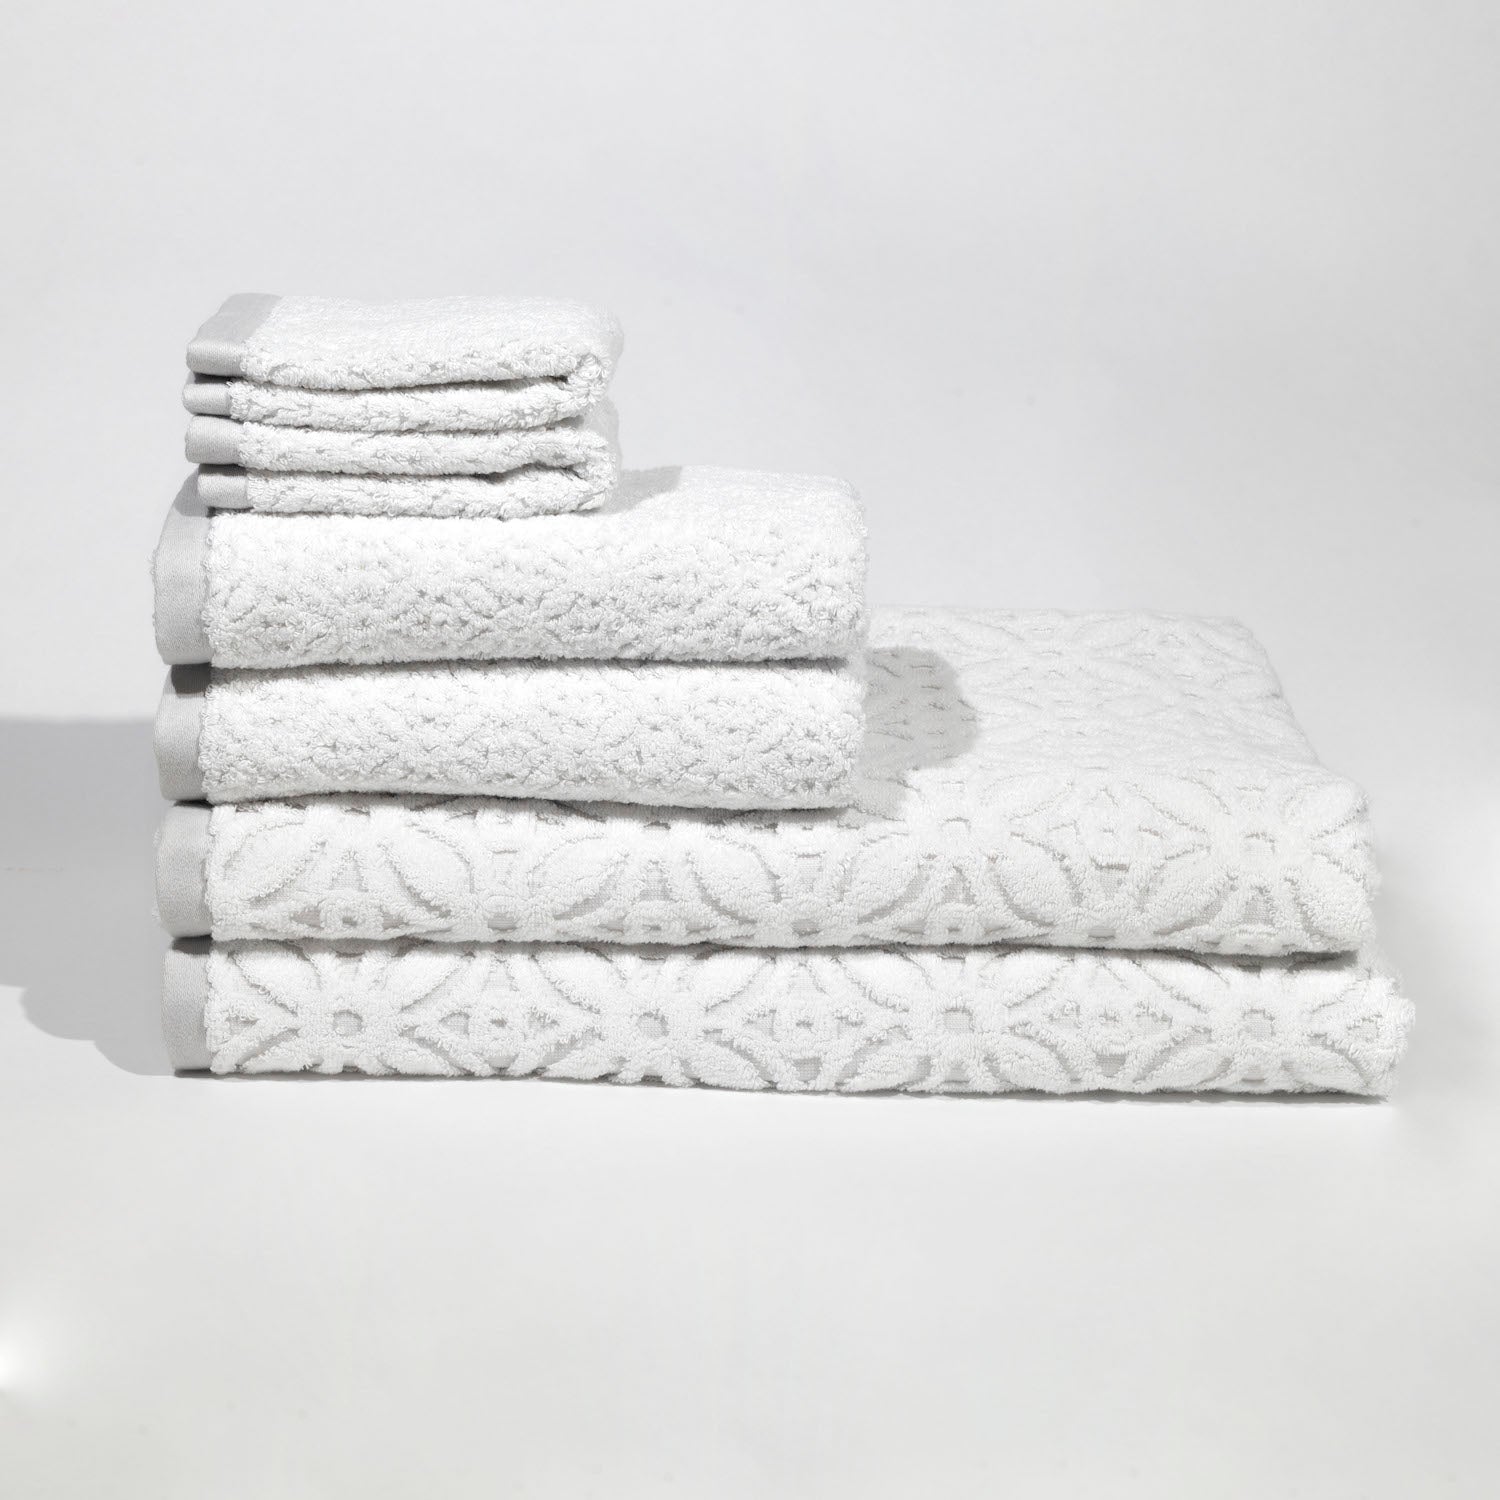 Bath Towels, Ethically Made Luxury Cotton